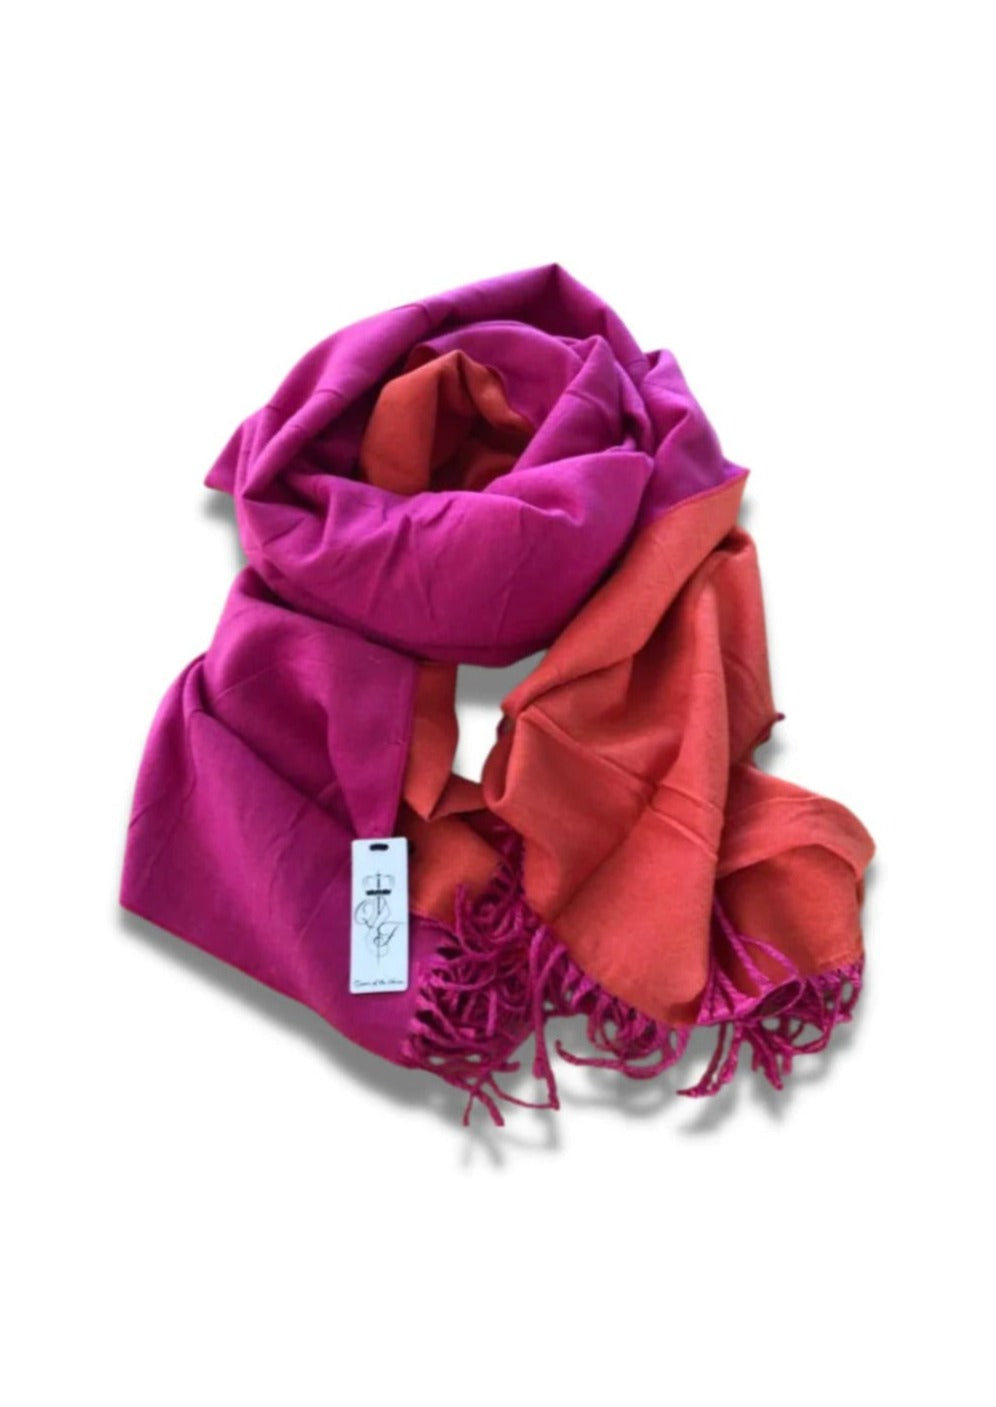 Soft Scarf - Cerise/Bright Orange,, by Queen of the Foxes These gorgeous scarves are an essential item for every winter wardrobe.  Super soft and snuggly, and in the most beautiful colour palettes  Perfect for cold winter days, these sell out fast…so be in quick!  We LOVE them!